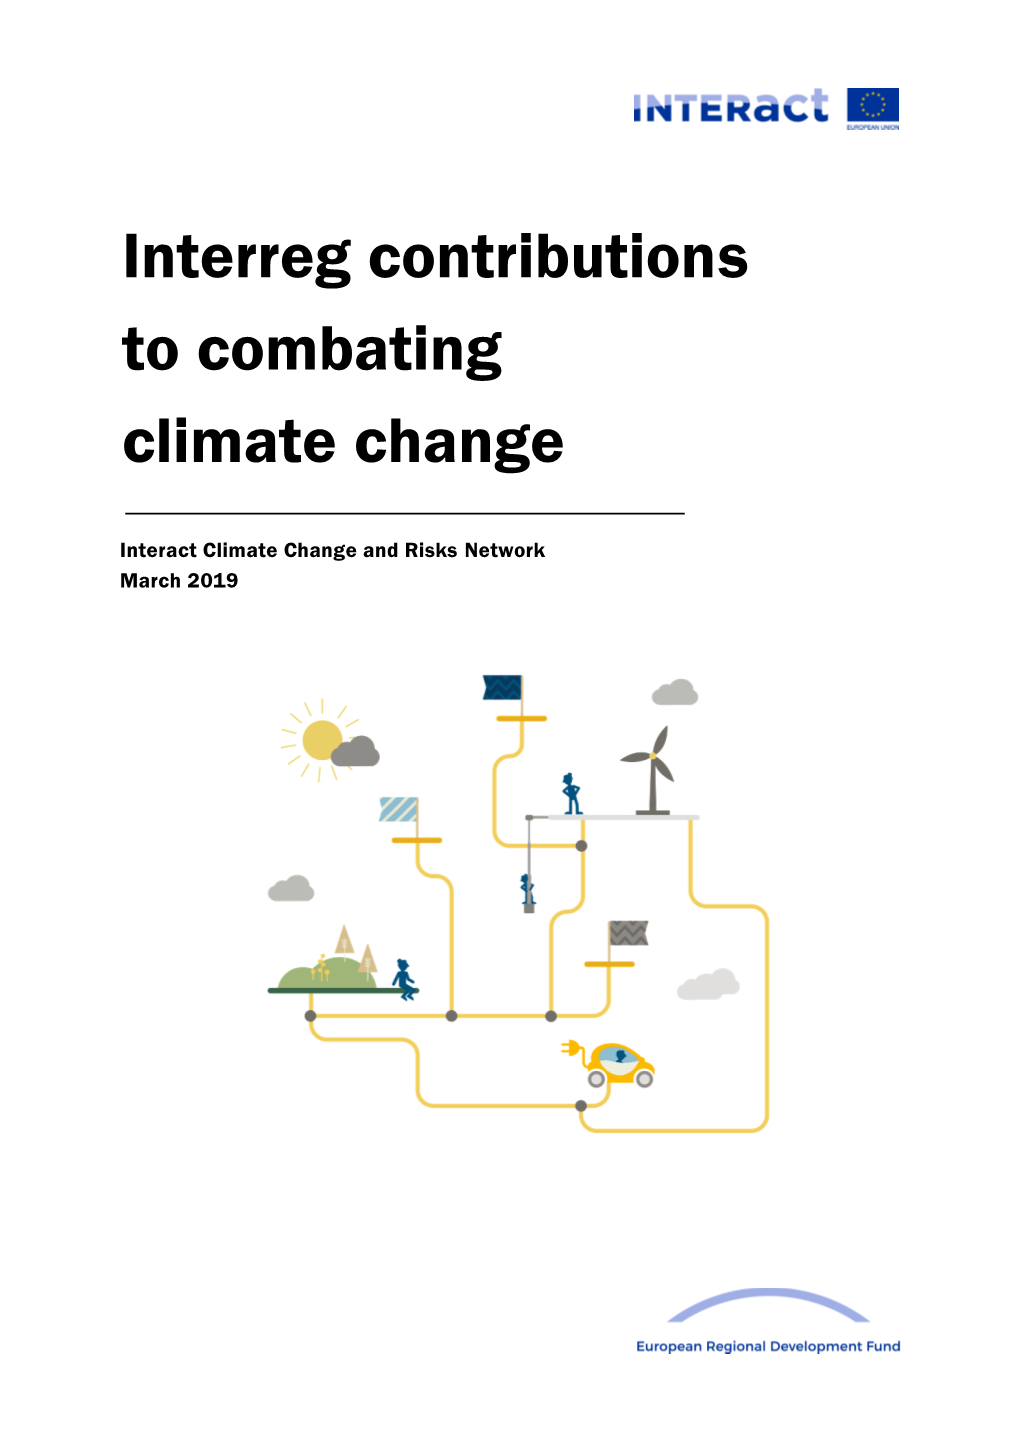 Interreg Contributions to Combating Climate Change